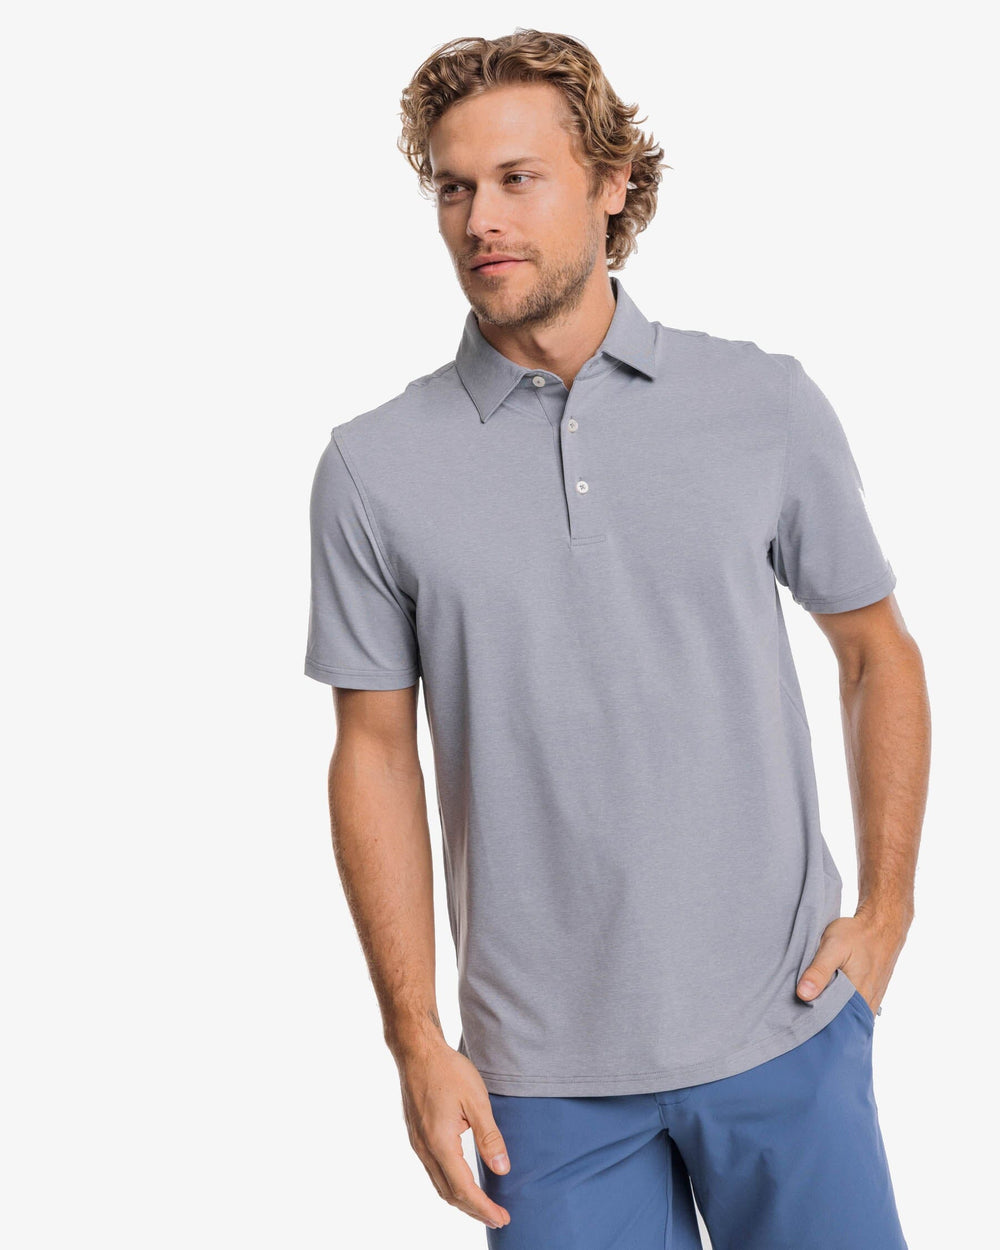 The front view of the brrr°®-eeze Heather Performance Polo Shirt by Southern Tide - Heather Steel Grey